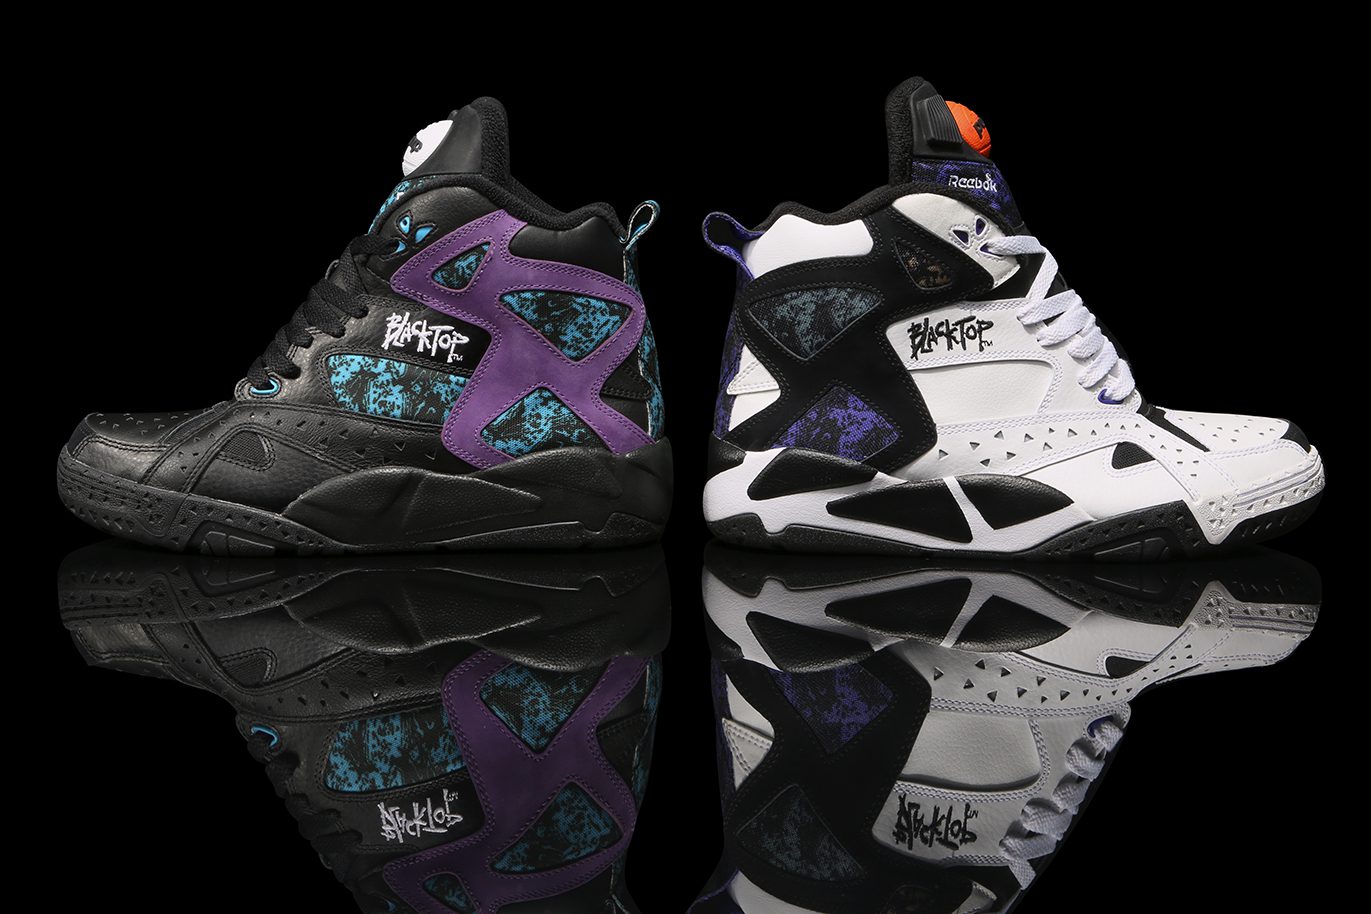 BMF Style: Reebok Classic Blacktop Collection - Hardwood and Hollywood